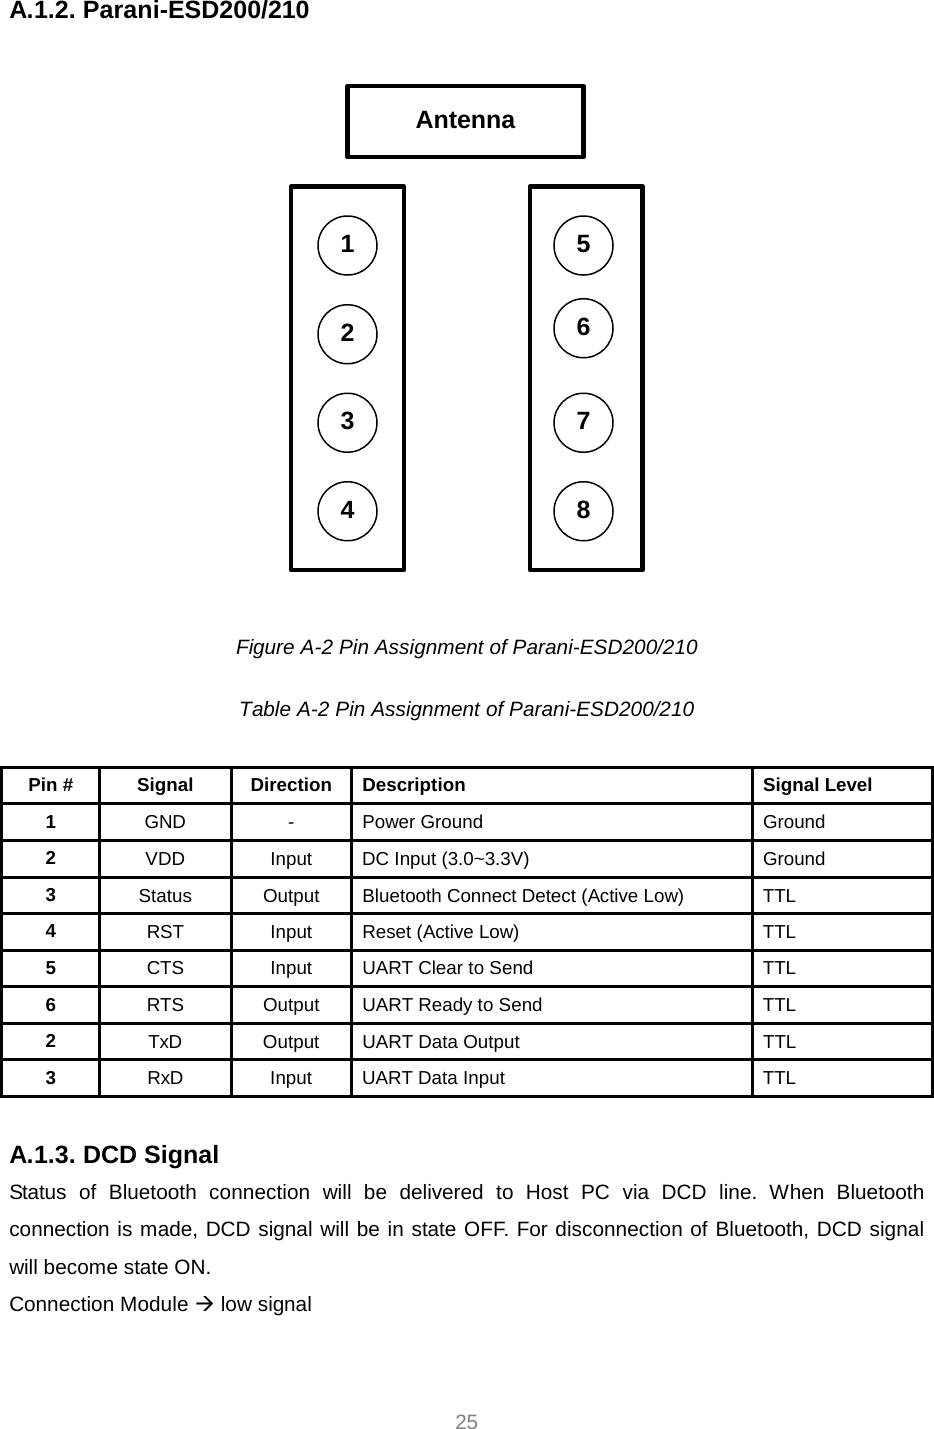     25 A.1.2. Parani-ESD200/210  Antenna12654387  Figure A-2 Pin Assignment of Parani-ESD200/210  Table A-2 Pin Assignment of Parani-ESD200/210  Pin #  Signal  Direction  Description  Signal Level 1  GND - Power Ground  Ground 2  VDD  Input  DC Input (3.0~3.3V)  Ground 3  Status  Output  Bluetooth Connect Detect (Active Low)  TTL 4  RST  Input  Reset (Active Low)  TTL 5  CTS  Input  UART Clear to Send  TTL 6  RTS  Output  UART Ready to Send  TTL 2  TxD  Output  UART Data Output  TTL 3  RxD  Input  UART Data Input  TTL  A.1.3. DCD Signal Status of Bluetooth connection will be delivered to Host PC via DCD line. When Bluetooth connection is made, DCD signal will be in state OFF. For disconnection of Bluetooth, DCD signal will become state ON.   Connection Module Æ low signal  